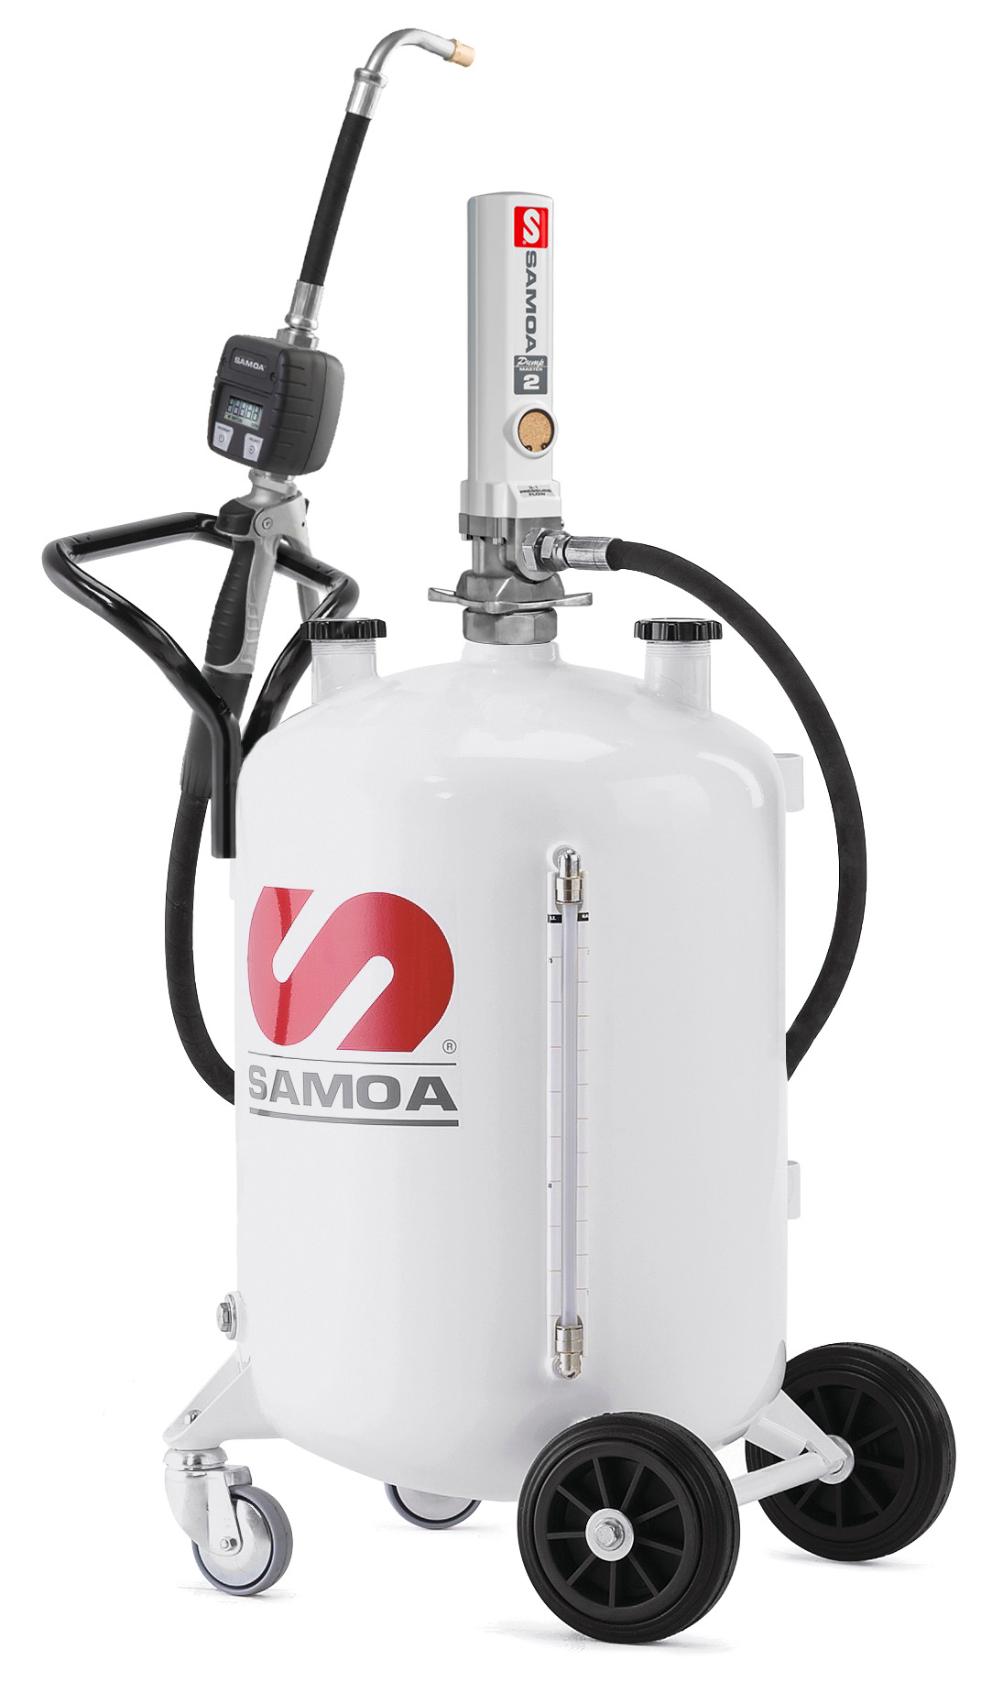 PUMPMASTER 2 - 3:1 RATIO OIL PNEUMATIC PUMP, 70 L SELF CONTAINER MOBILE PACKAGE